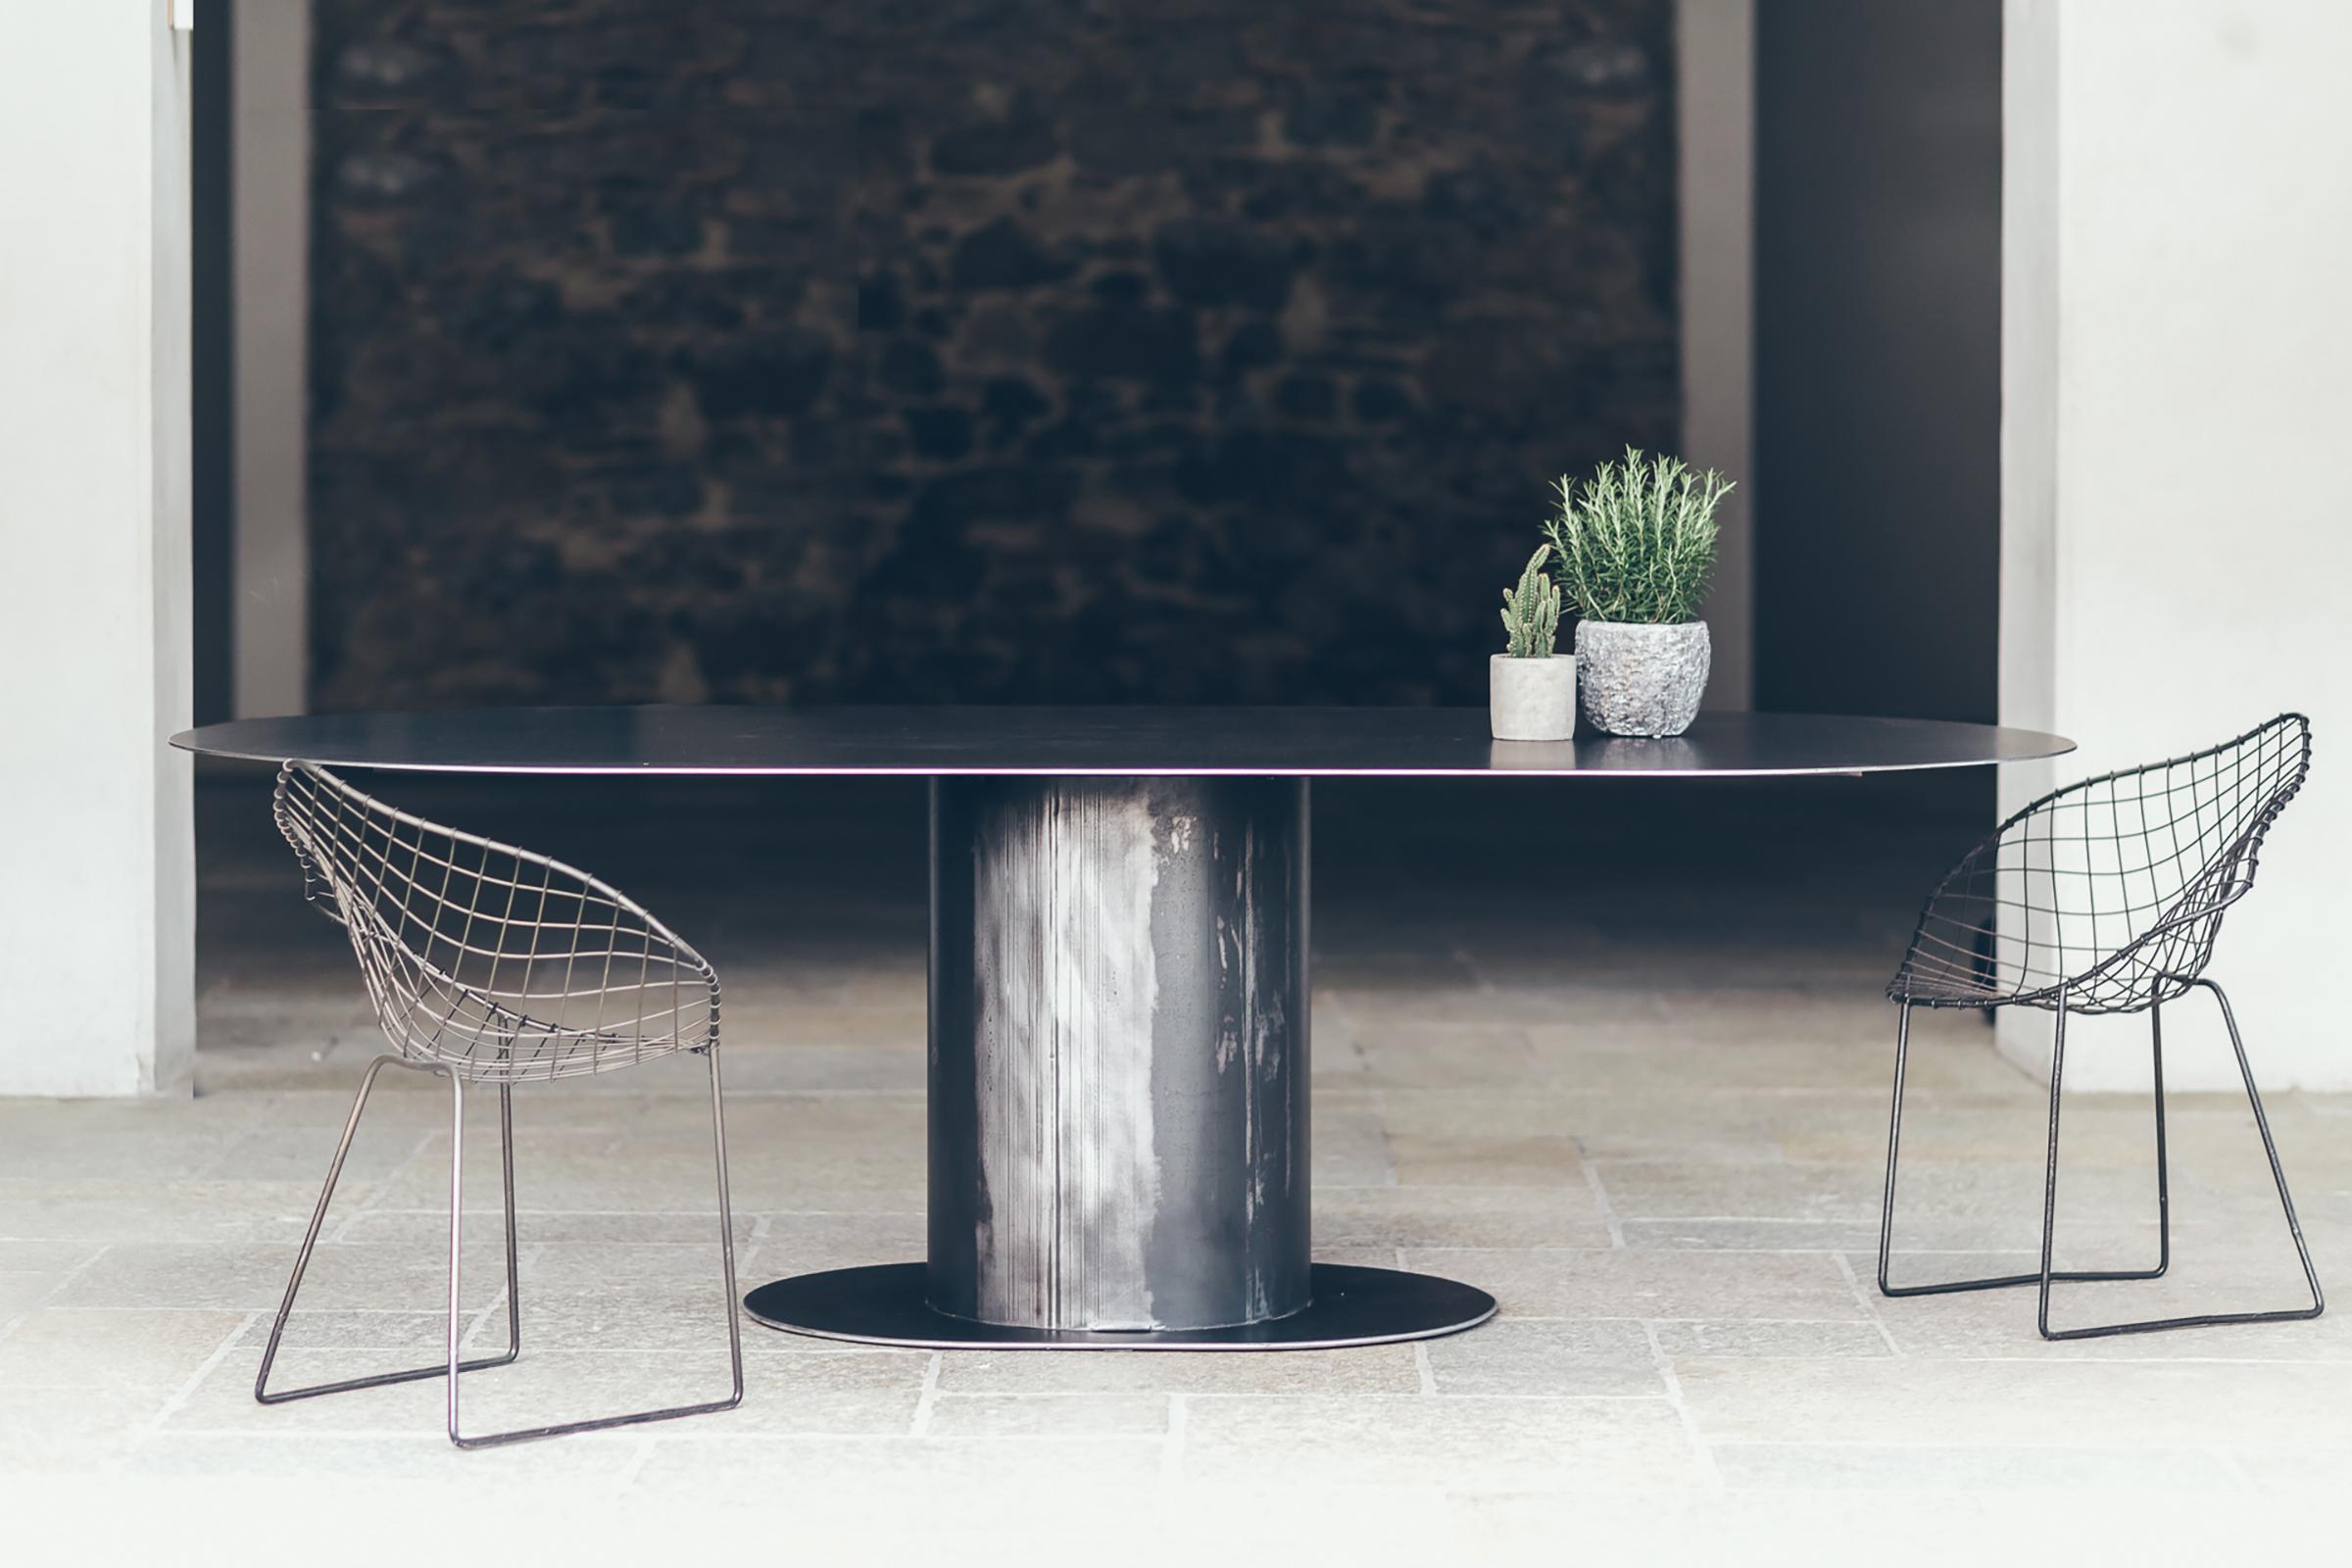 Dining table oval rock in handcrafted
steel, in dark finish. French manufactured.

